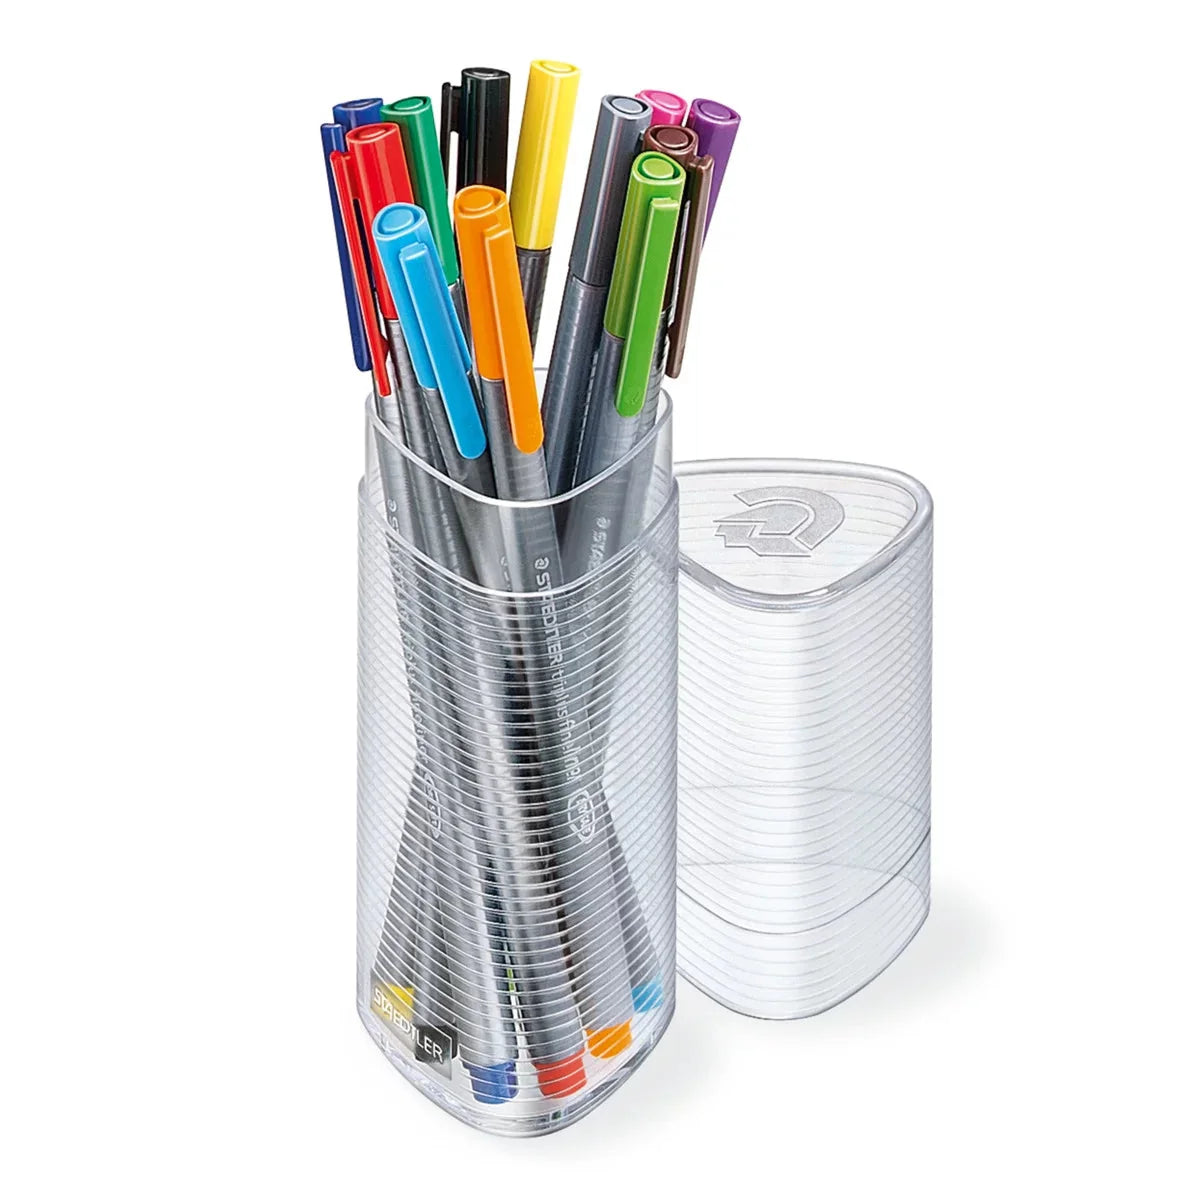 Wholesale prices with free shipping all over United States Staedtler Triplus Fineliner, Super Fine 0.3mm, Easel Case, 12 Assorted Colors - Steven Deals